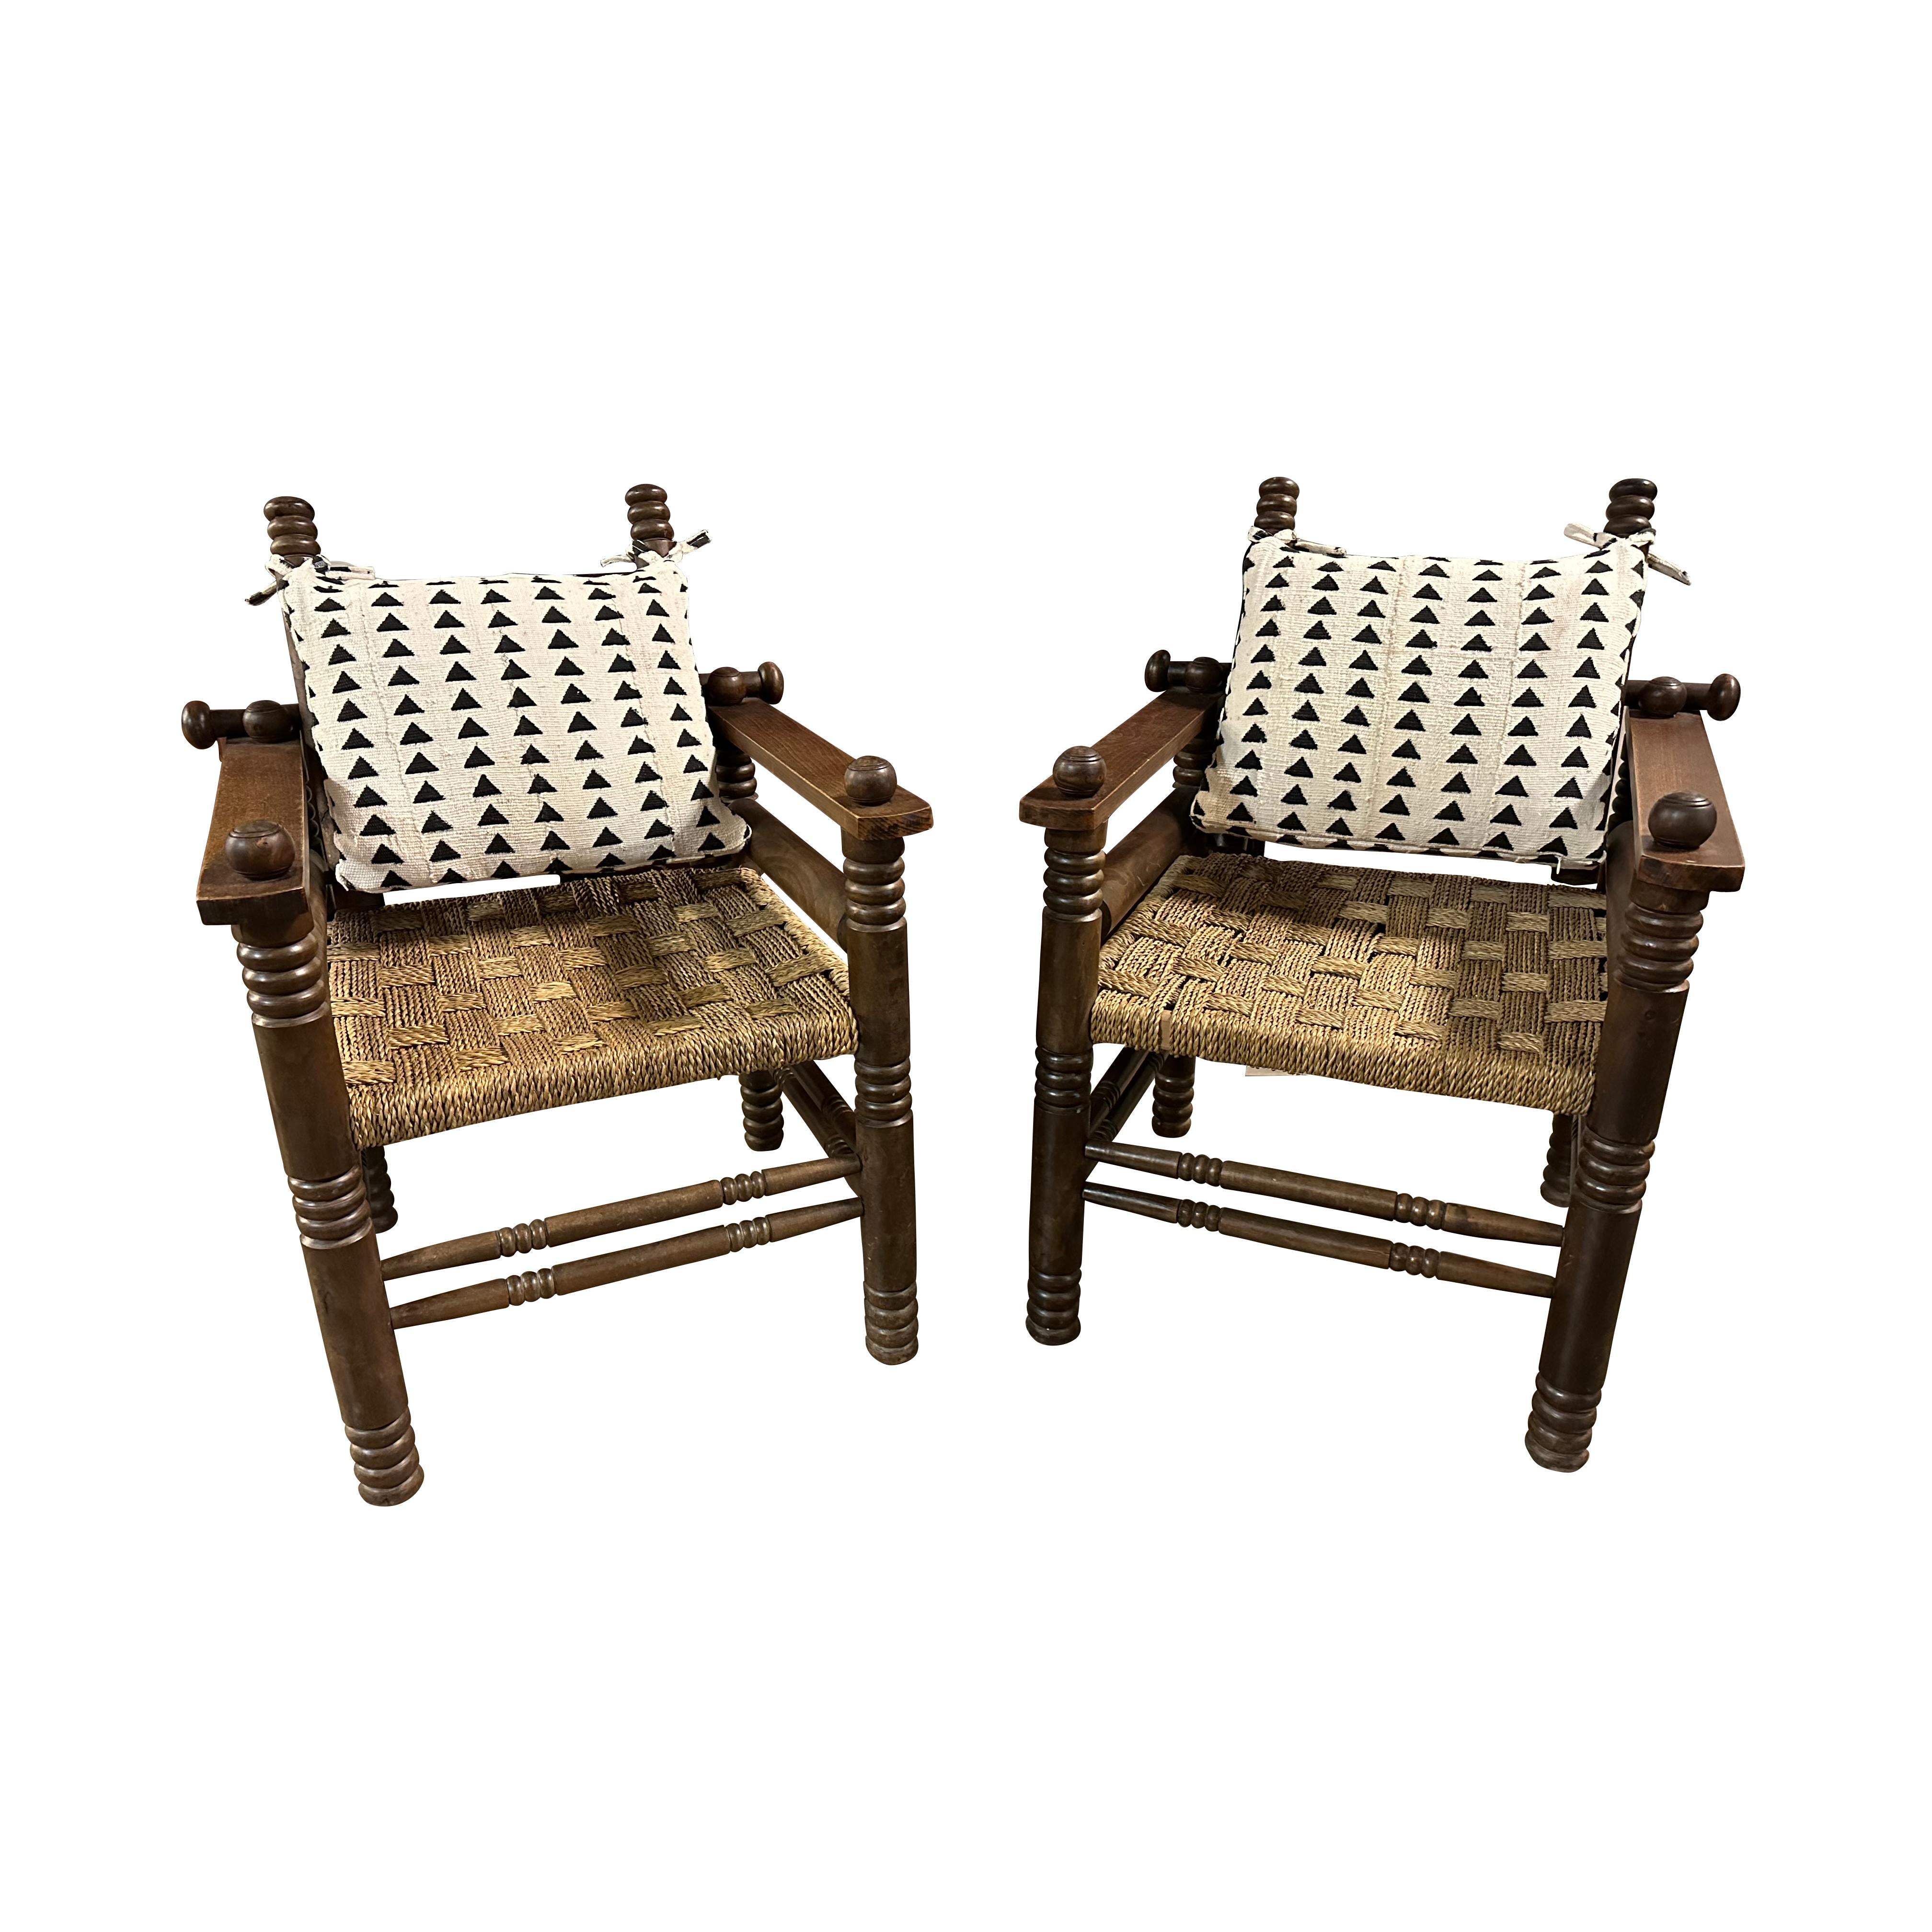 Pair of armed lounge chairs in the Art Deco style by collectible designer Charles Dudouyt. Well-crafted hardwood frames sport a woven rush seat. Ready for the addition of a custom back cushion. France, 1940s.